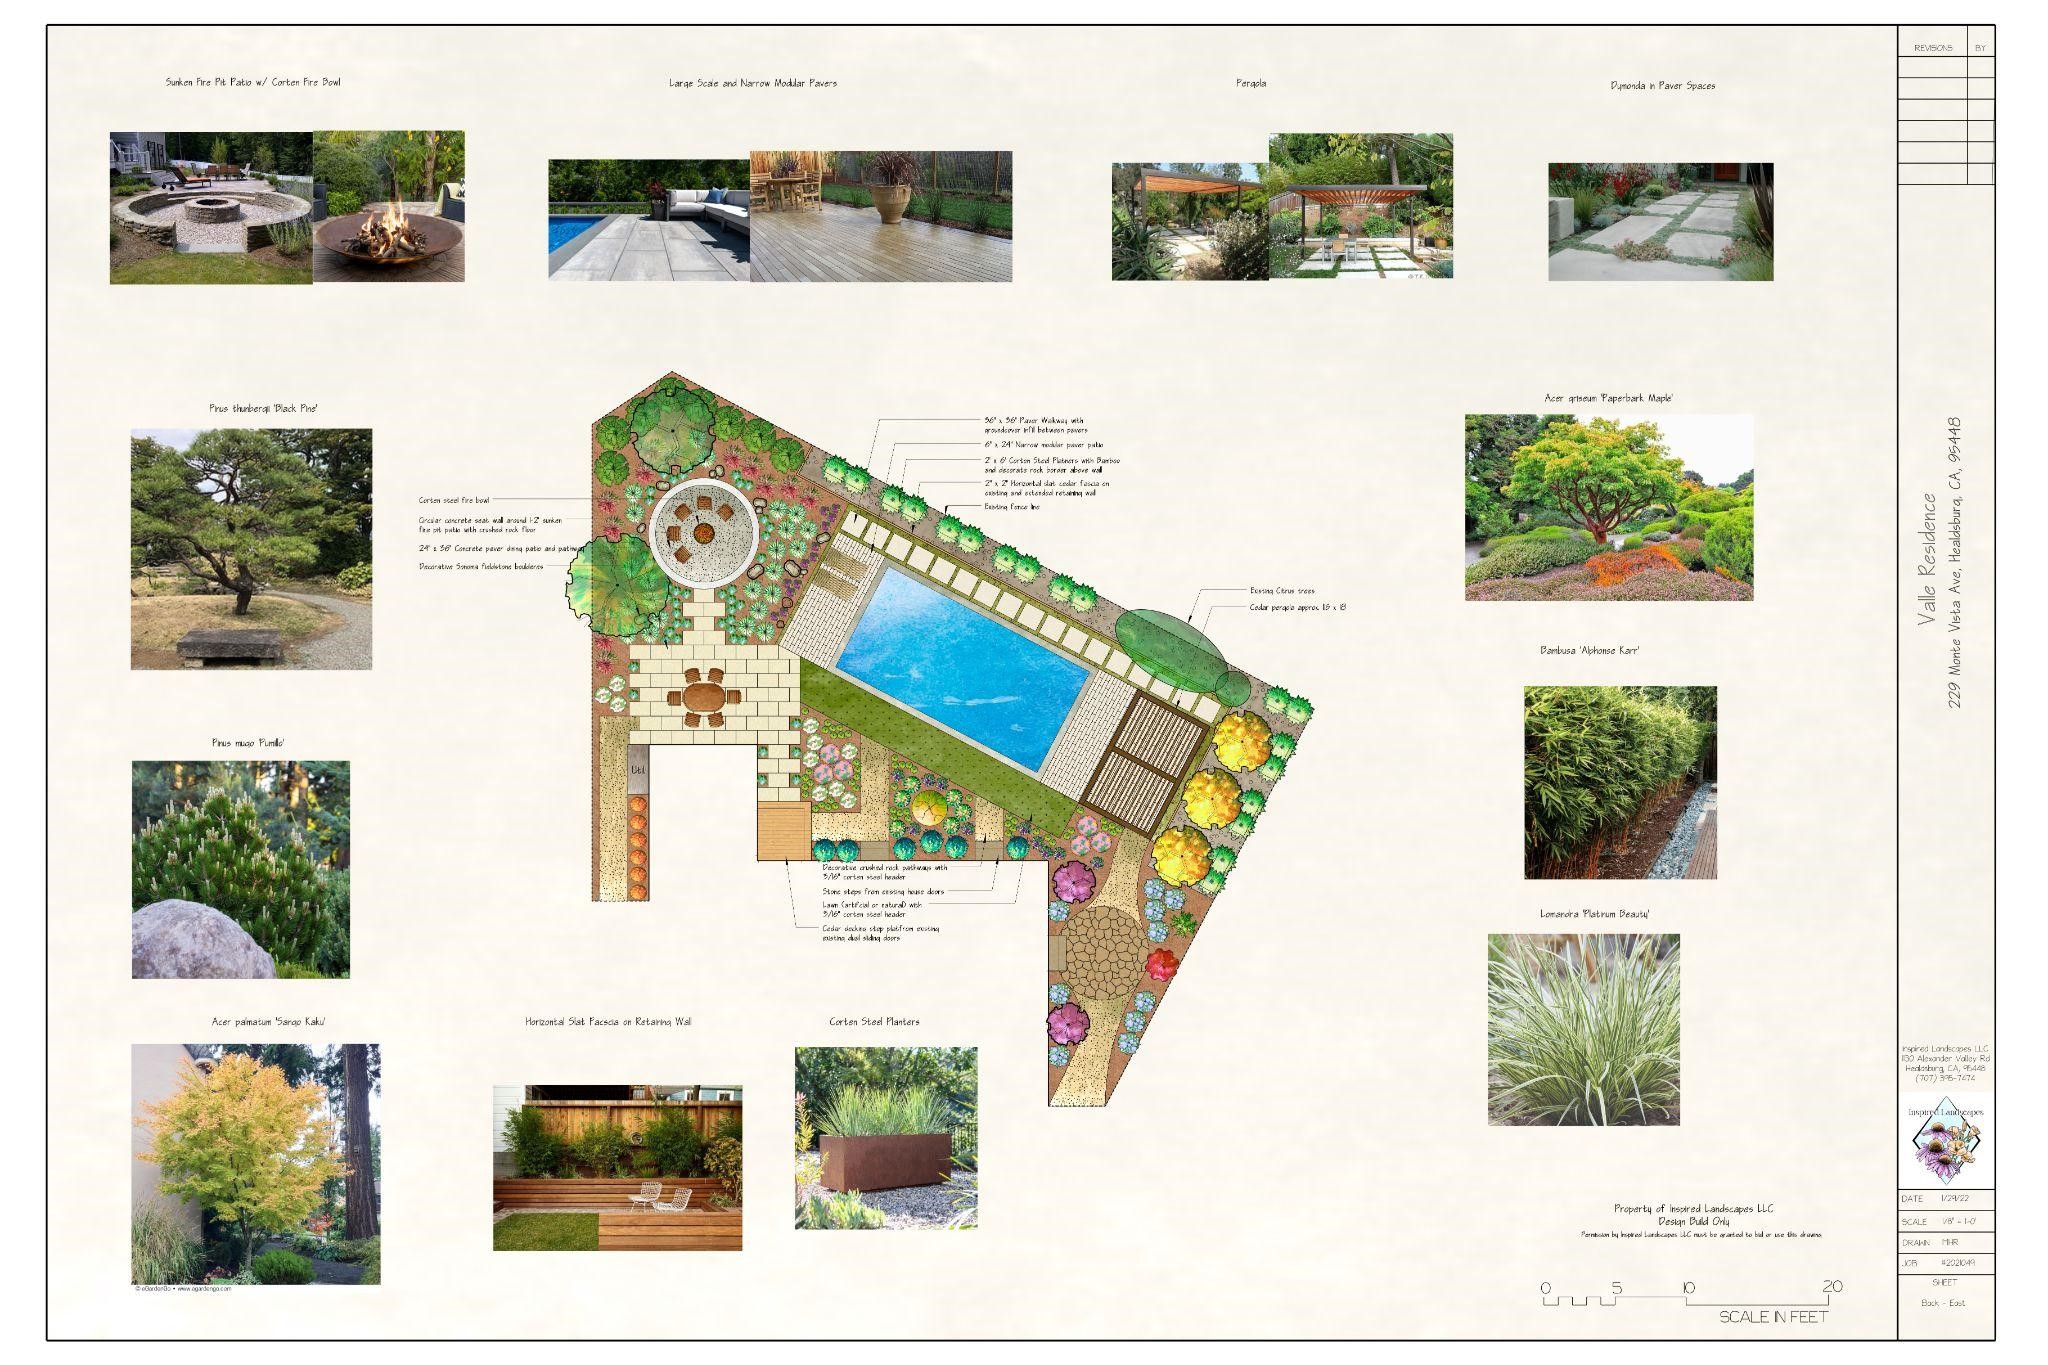 What are the advantages of selecting a landscape design build company?